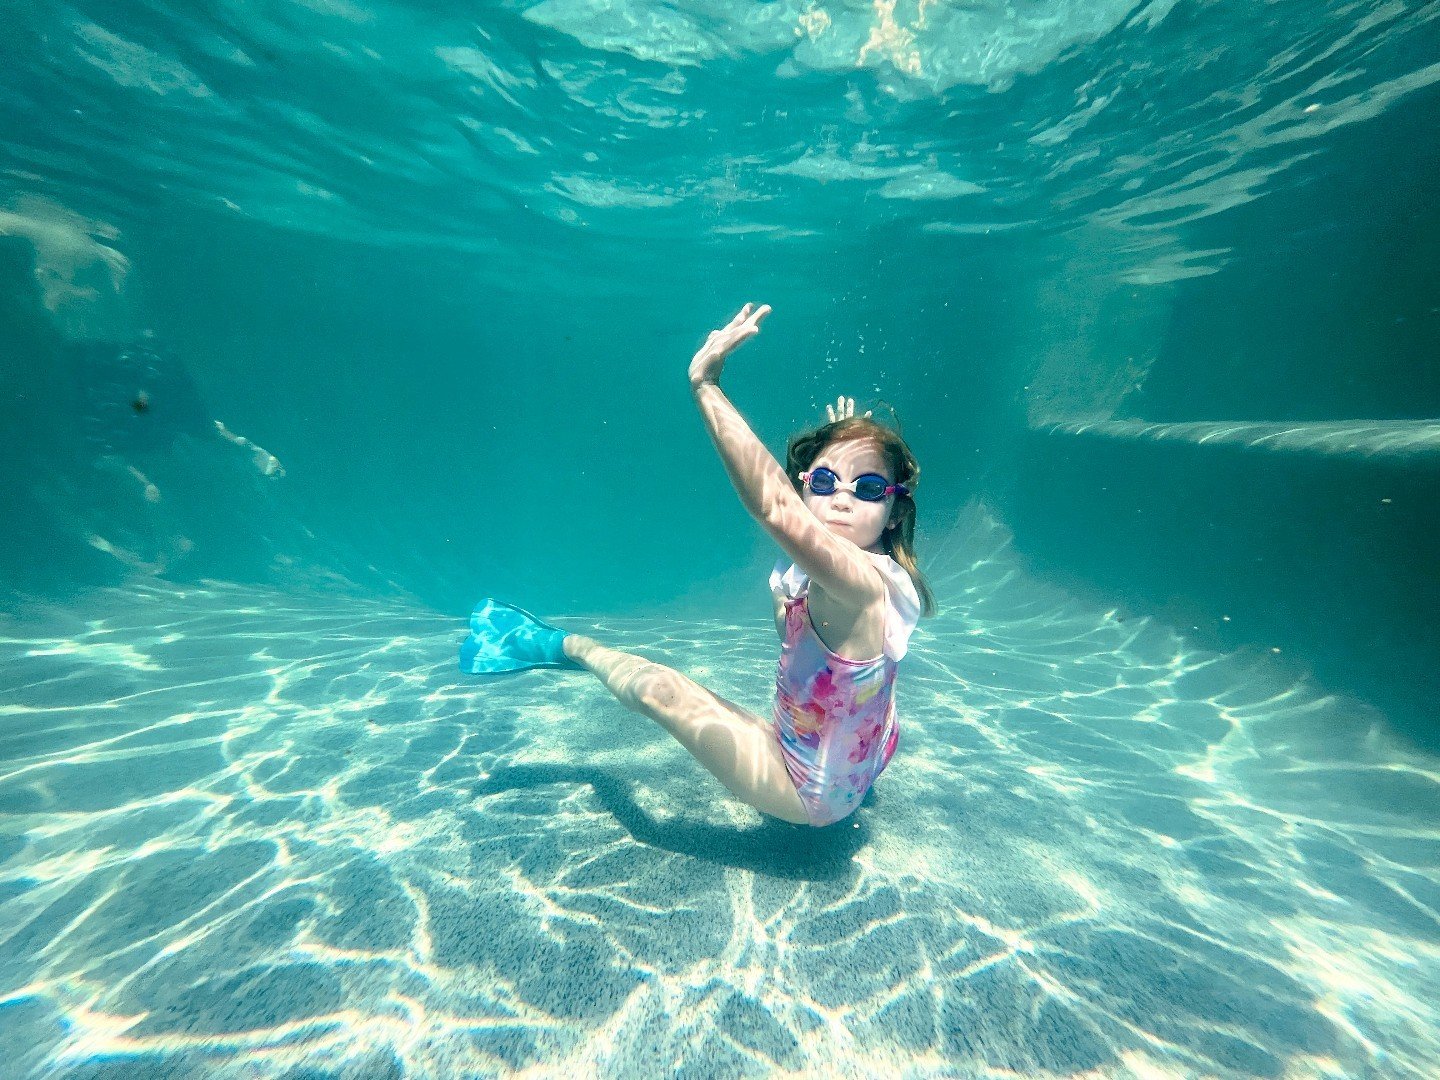 We made it through the school year!

Summertime shenanigans, here we come!

#momwithacamera #underwaterkids #underwaterphotography #PhoenixFamilyPhotographer #ScottsdaleFamilyPhotographer #PhoenixLifestylePhotographer #PhoenixInHomePhotographer #Ariz